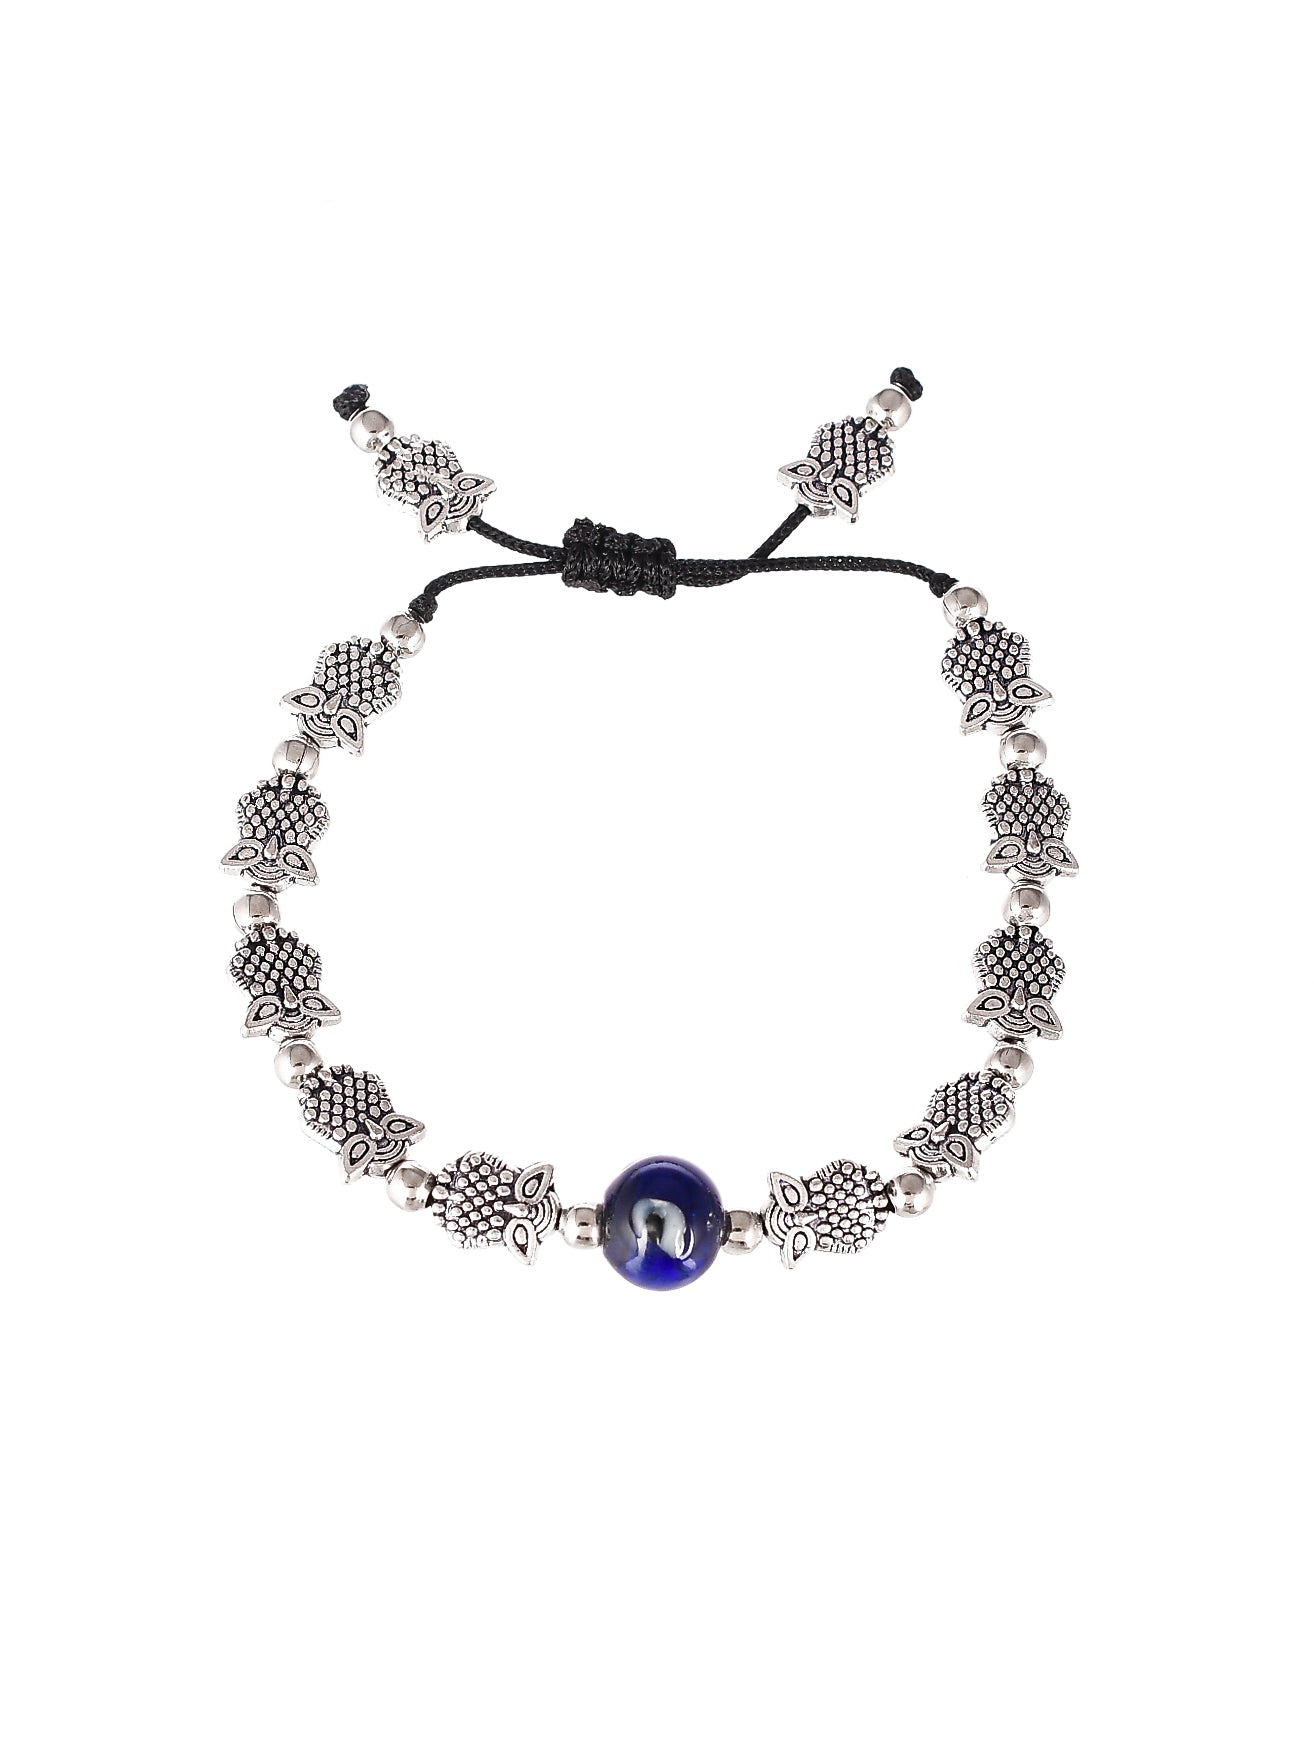 Silver Plated Owl Charm Bracelets for Women